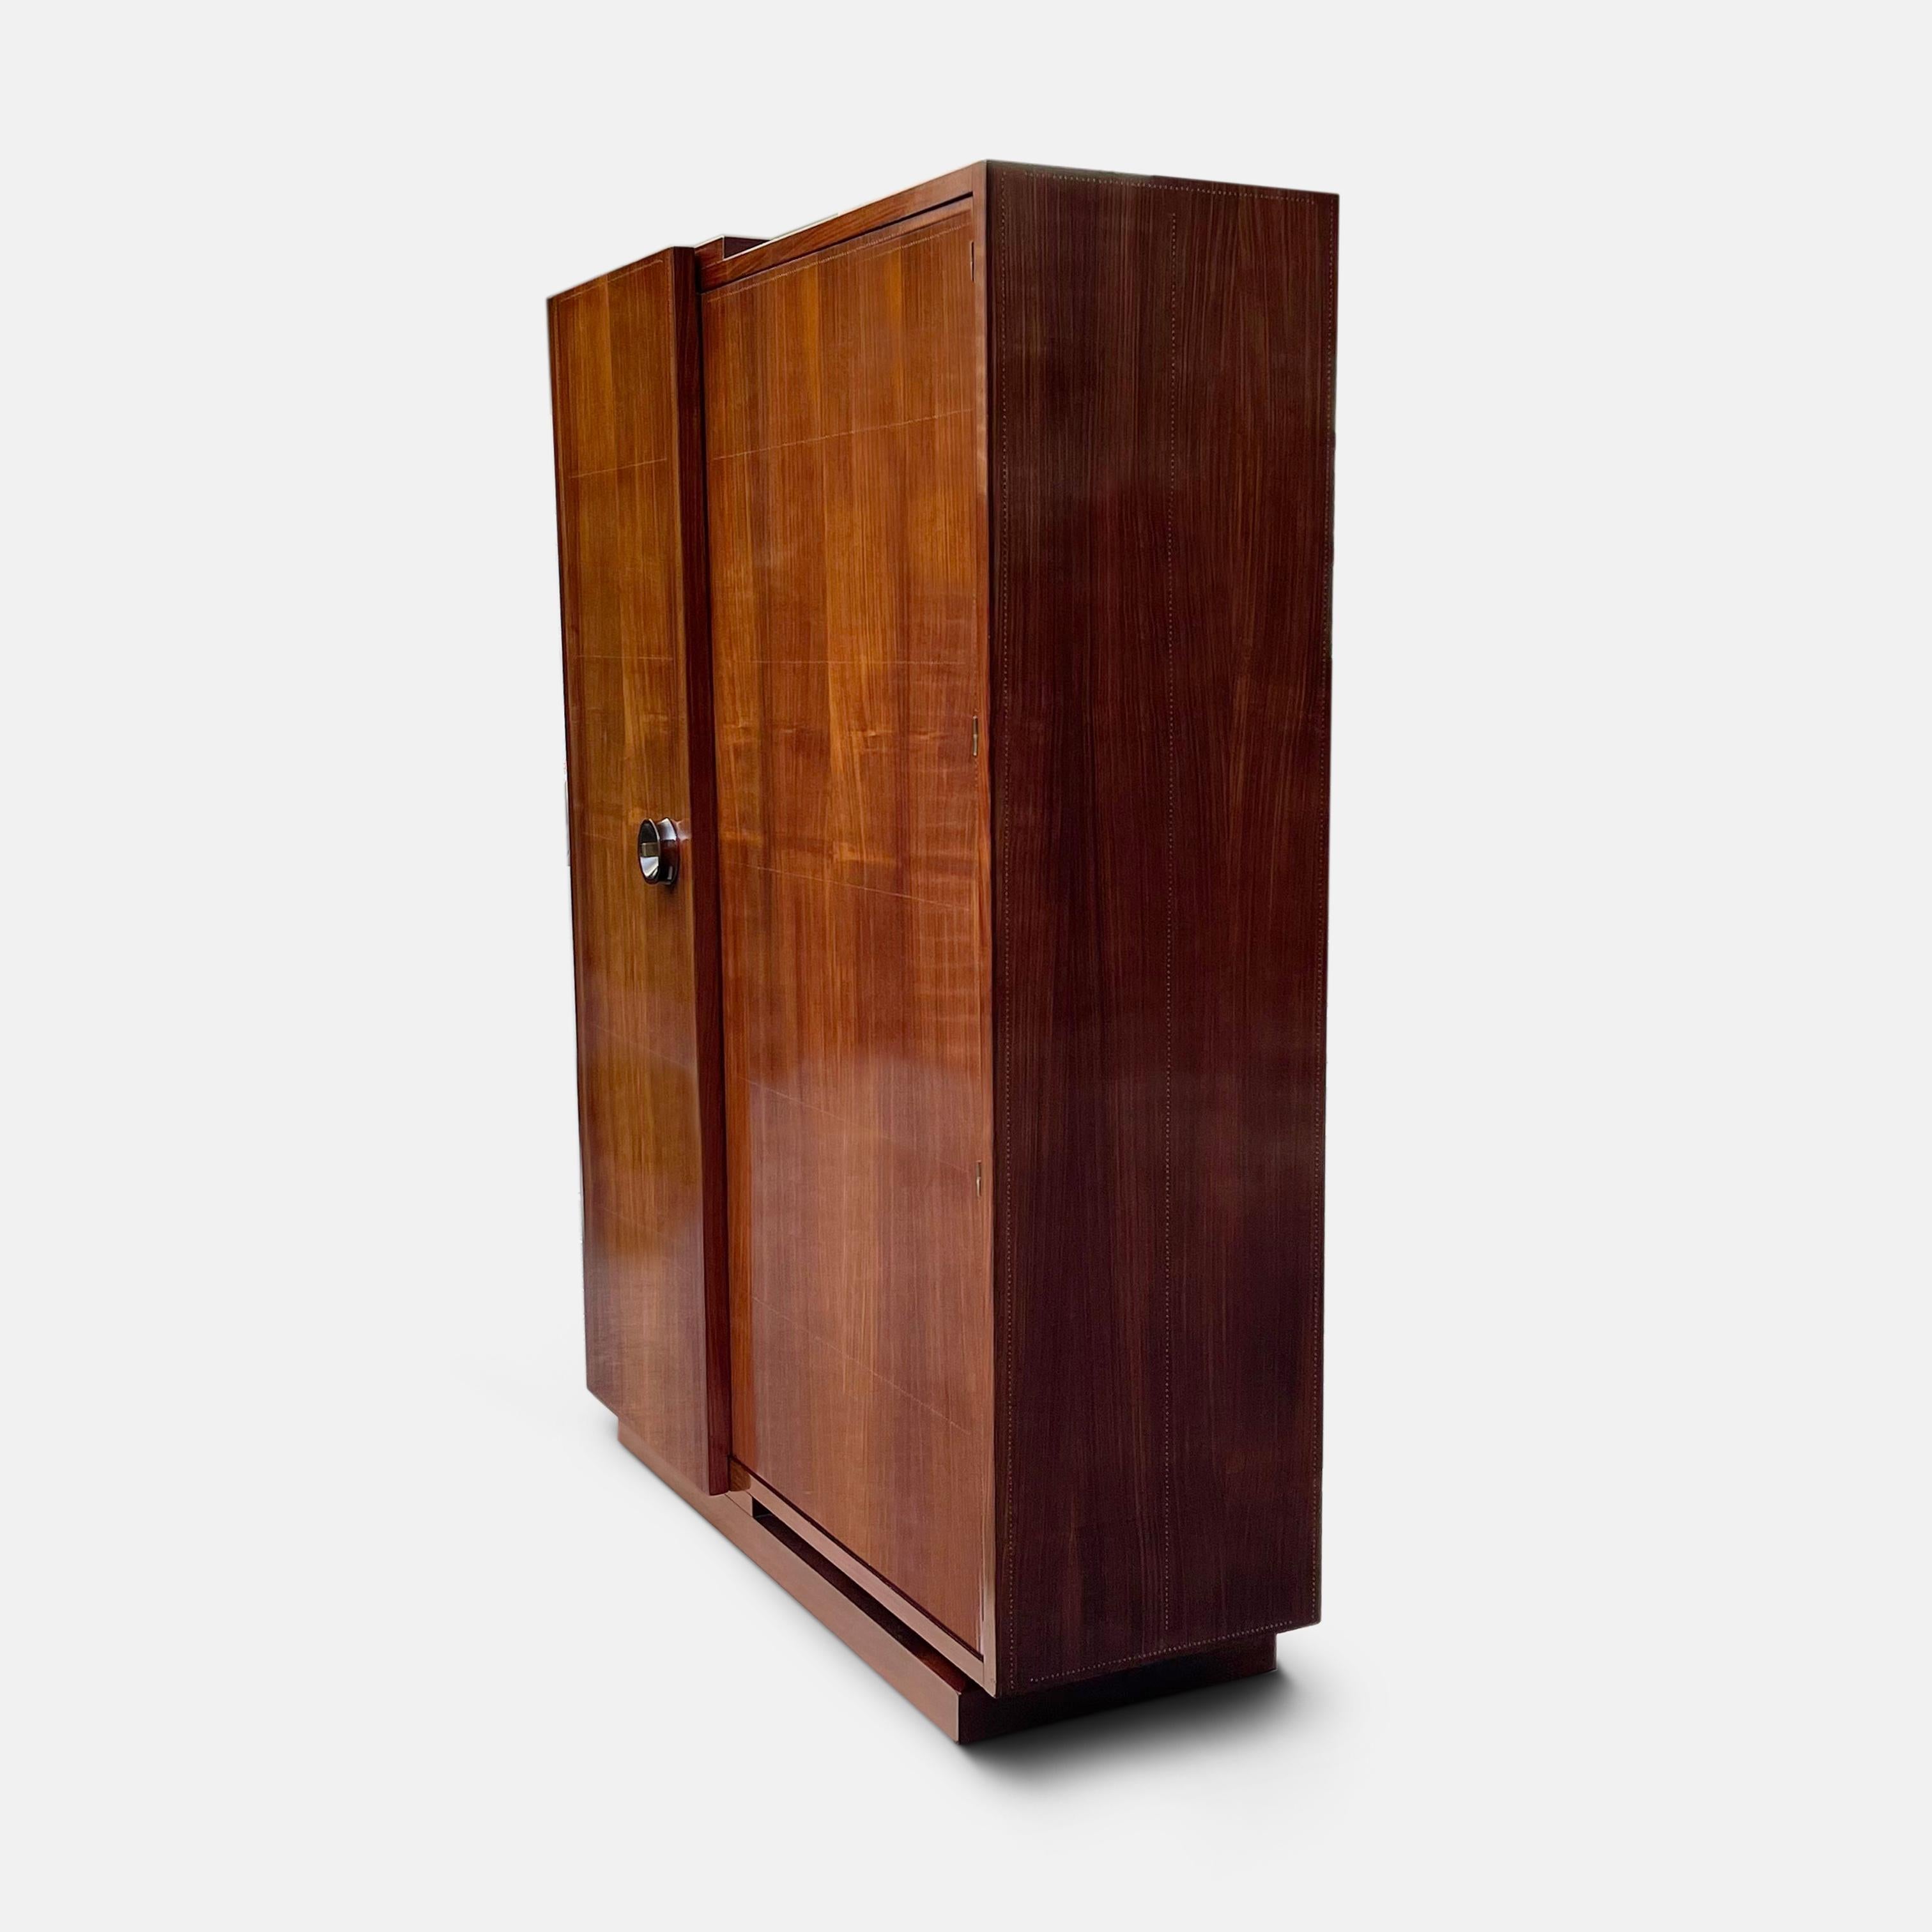 This masterful and exceptionally proportioned Modernist wardrobe by André Sornay shows why his stature as one of the most important designers of the Art Deco period has only grown over time. Restless and confident in his search for elegance and